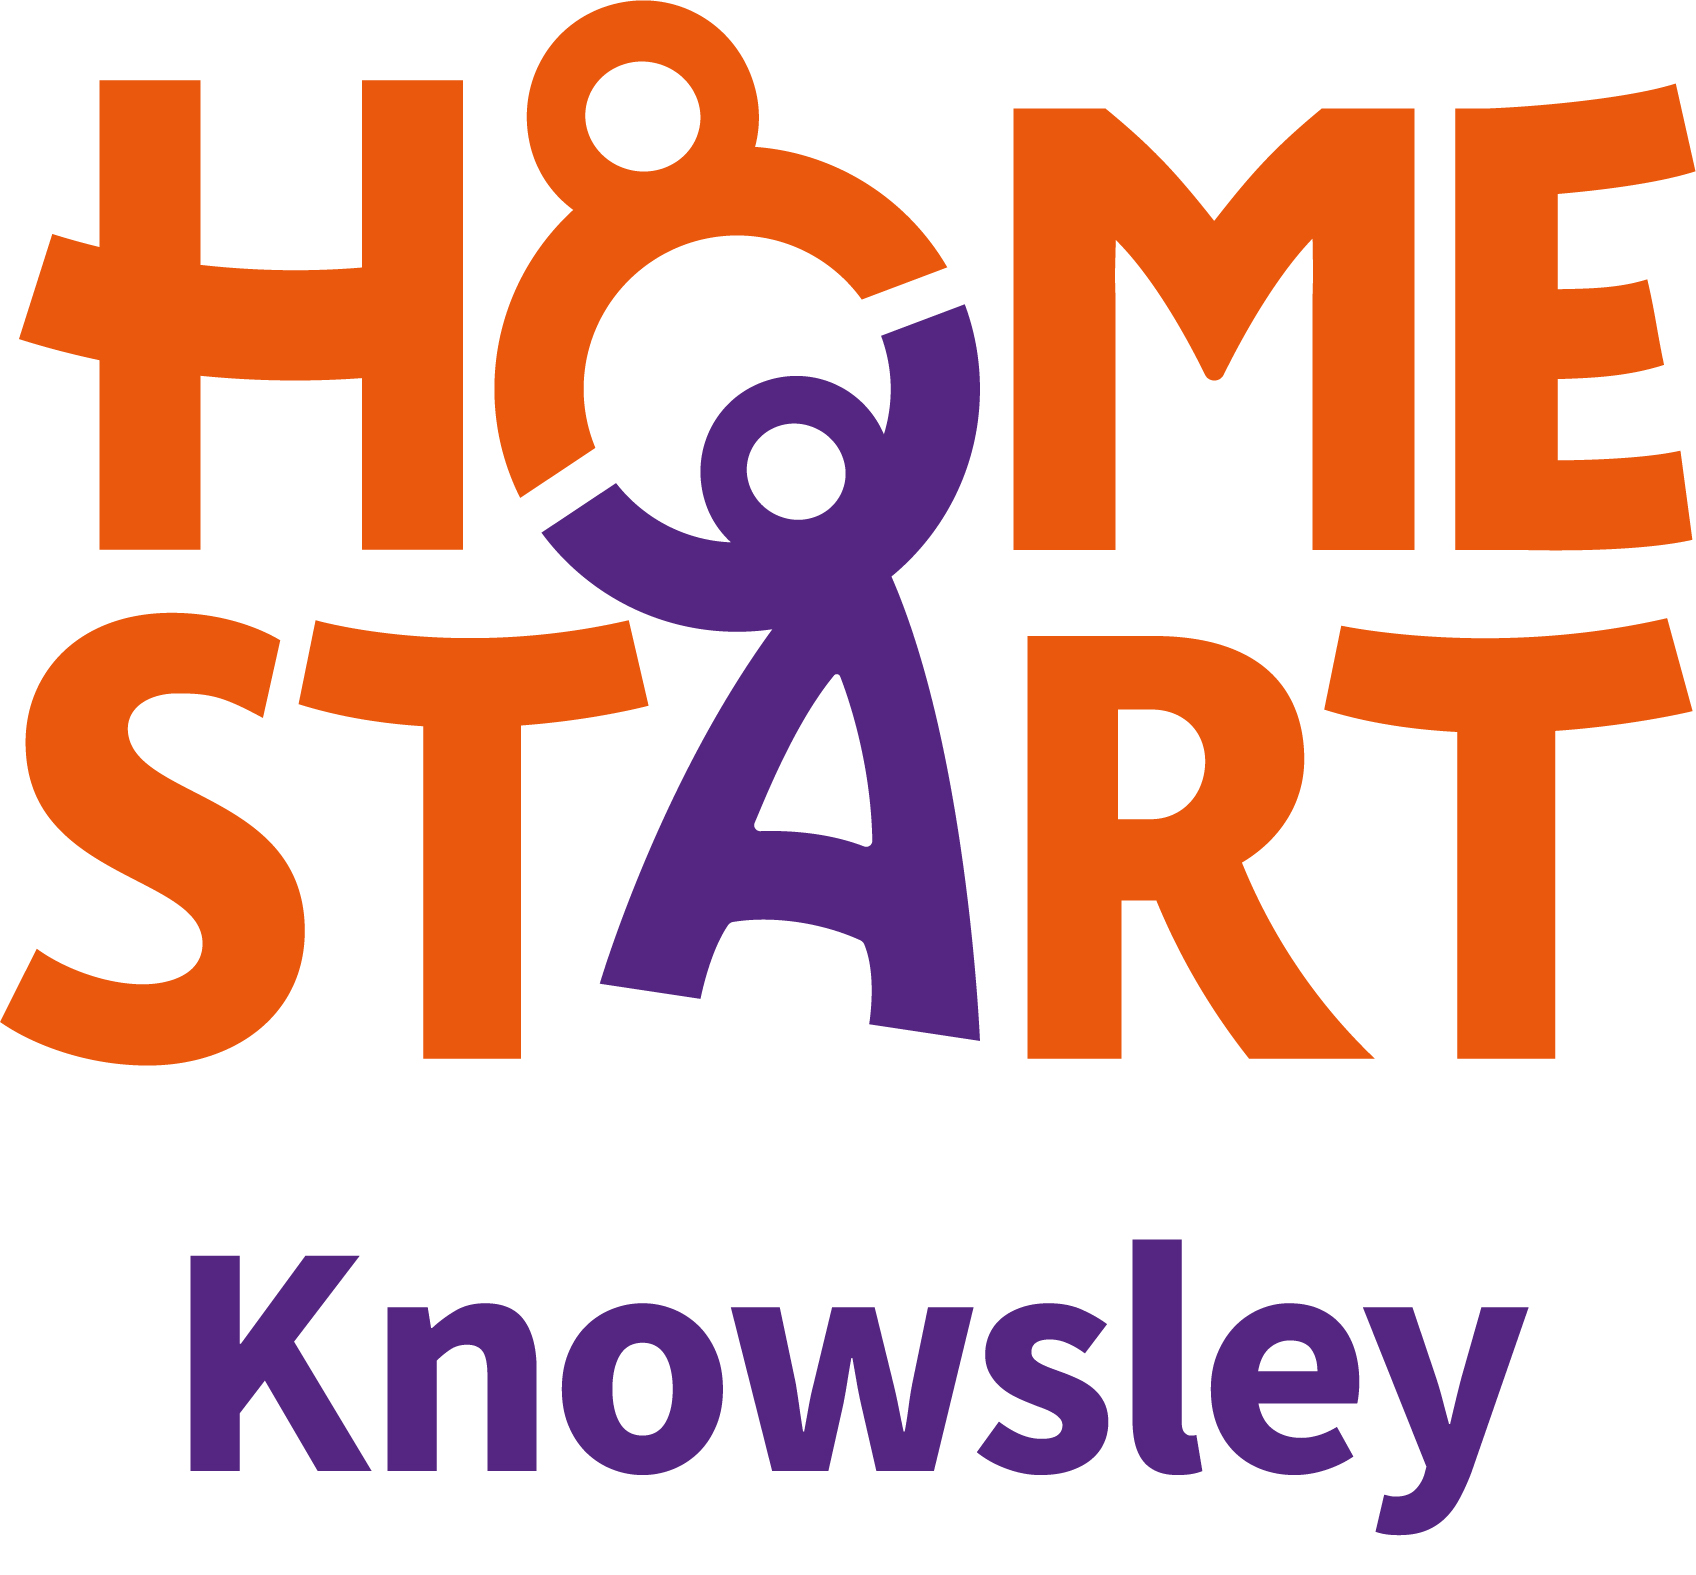 Home-Start Knowsley